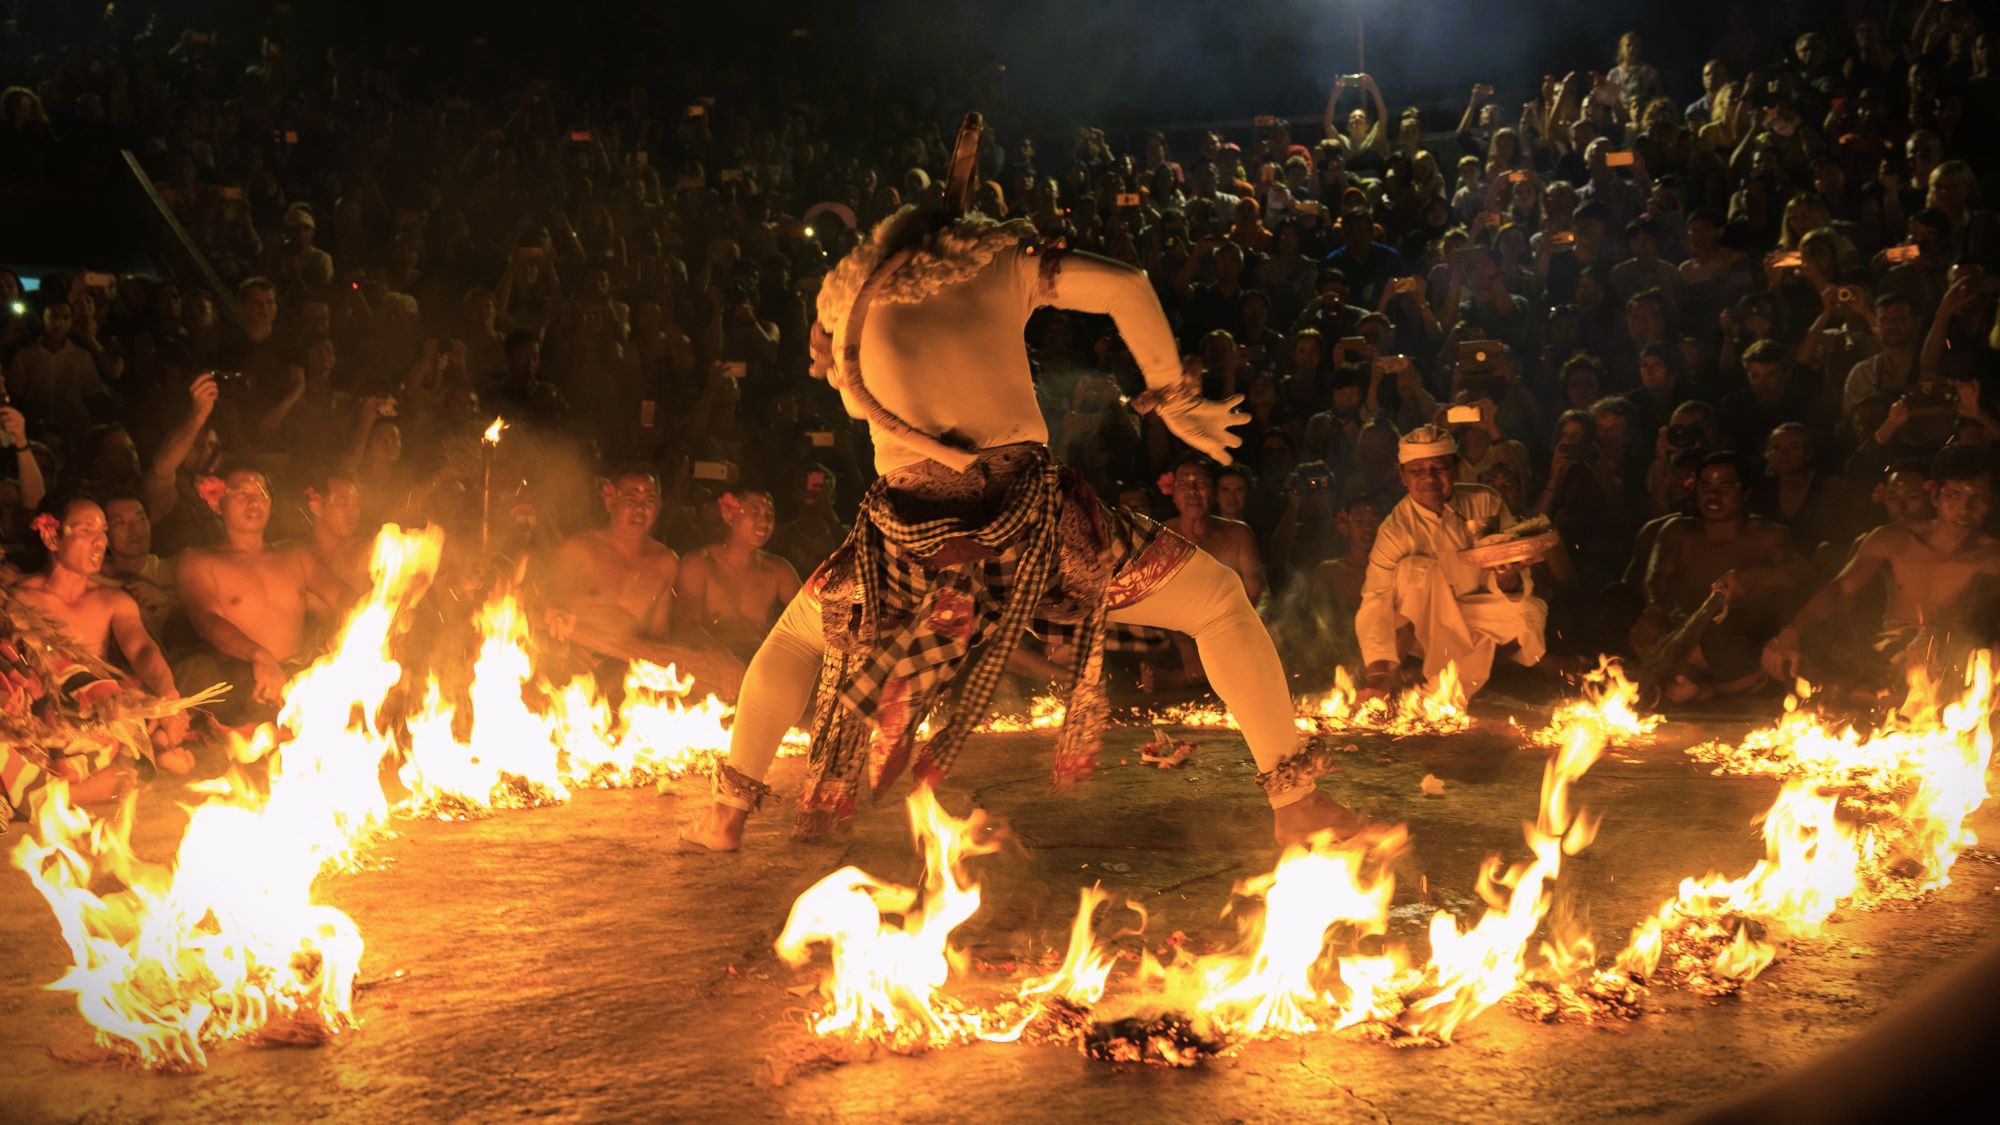 Fire and Dances...